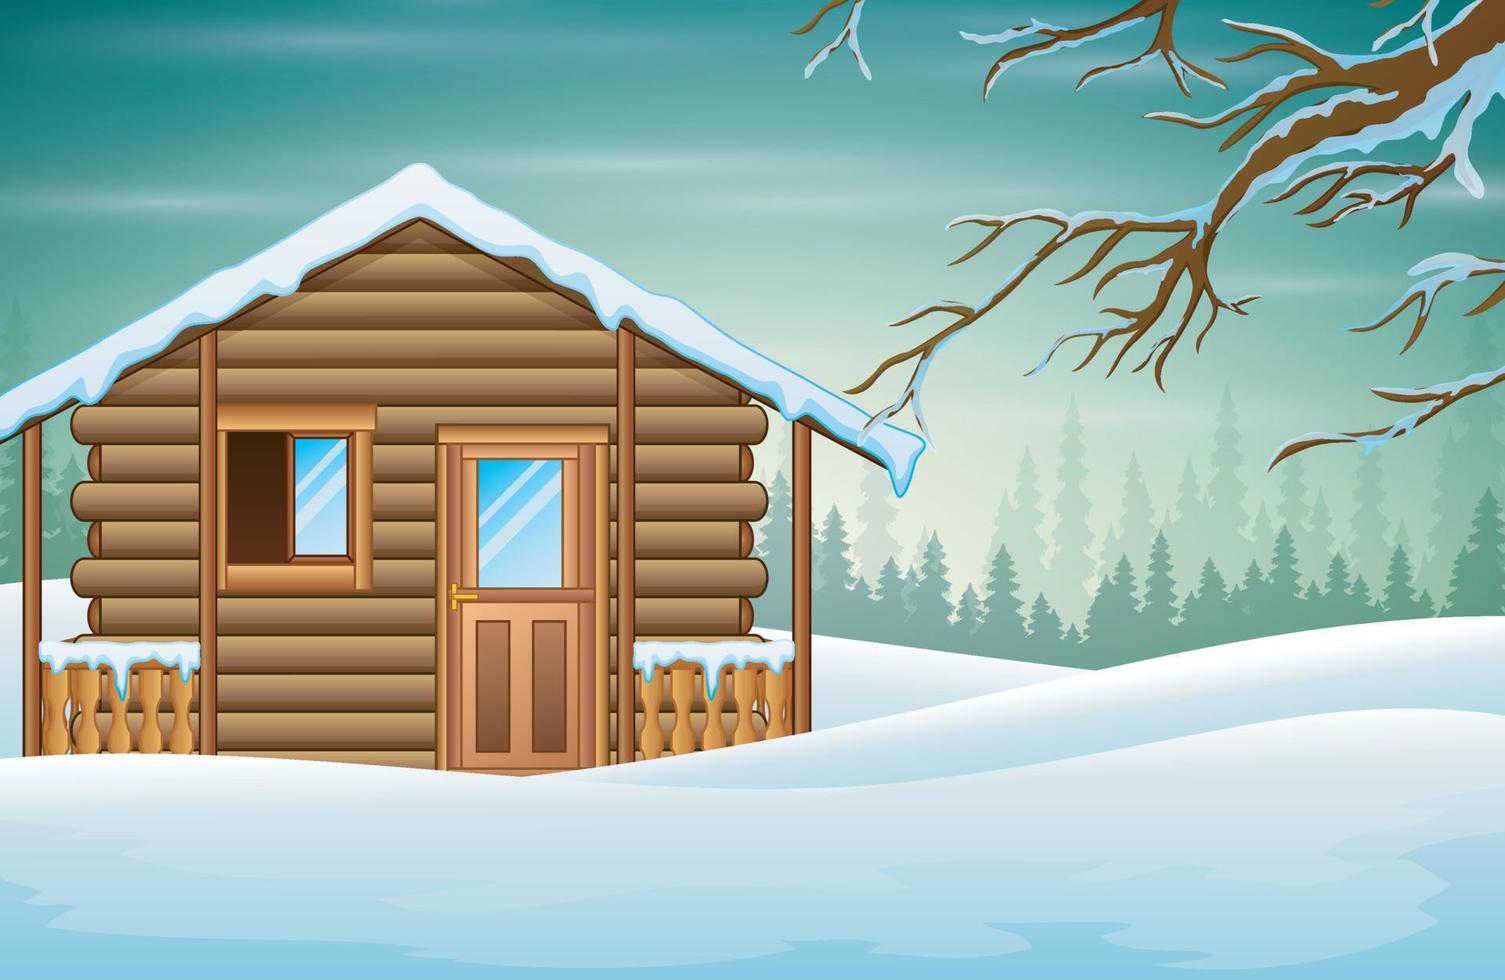 A small wooden house with a snowy background vector